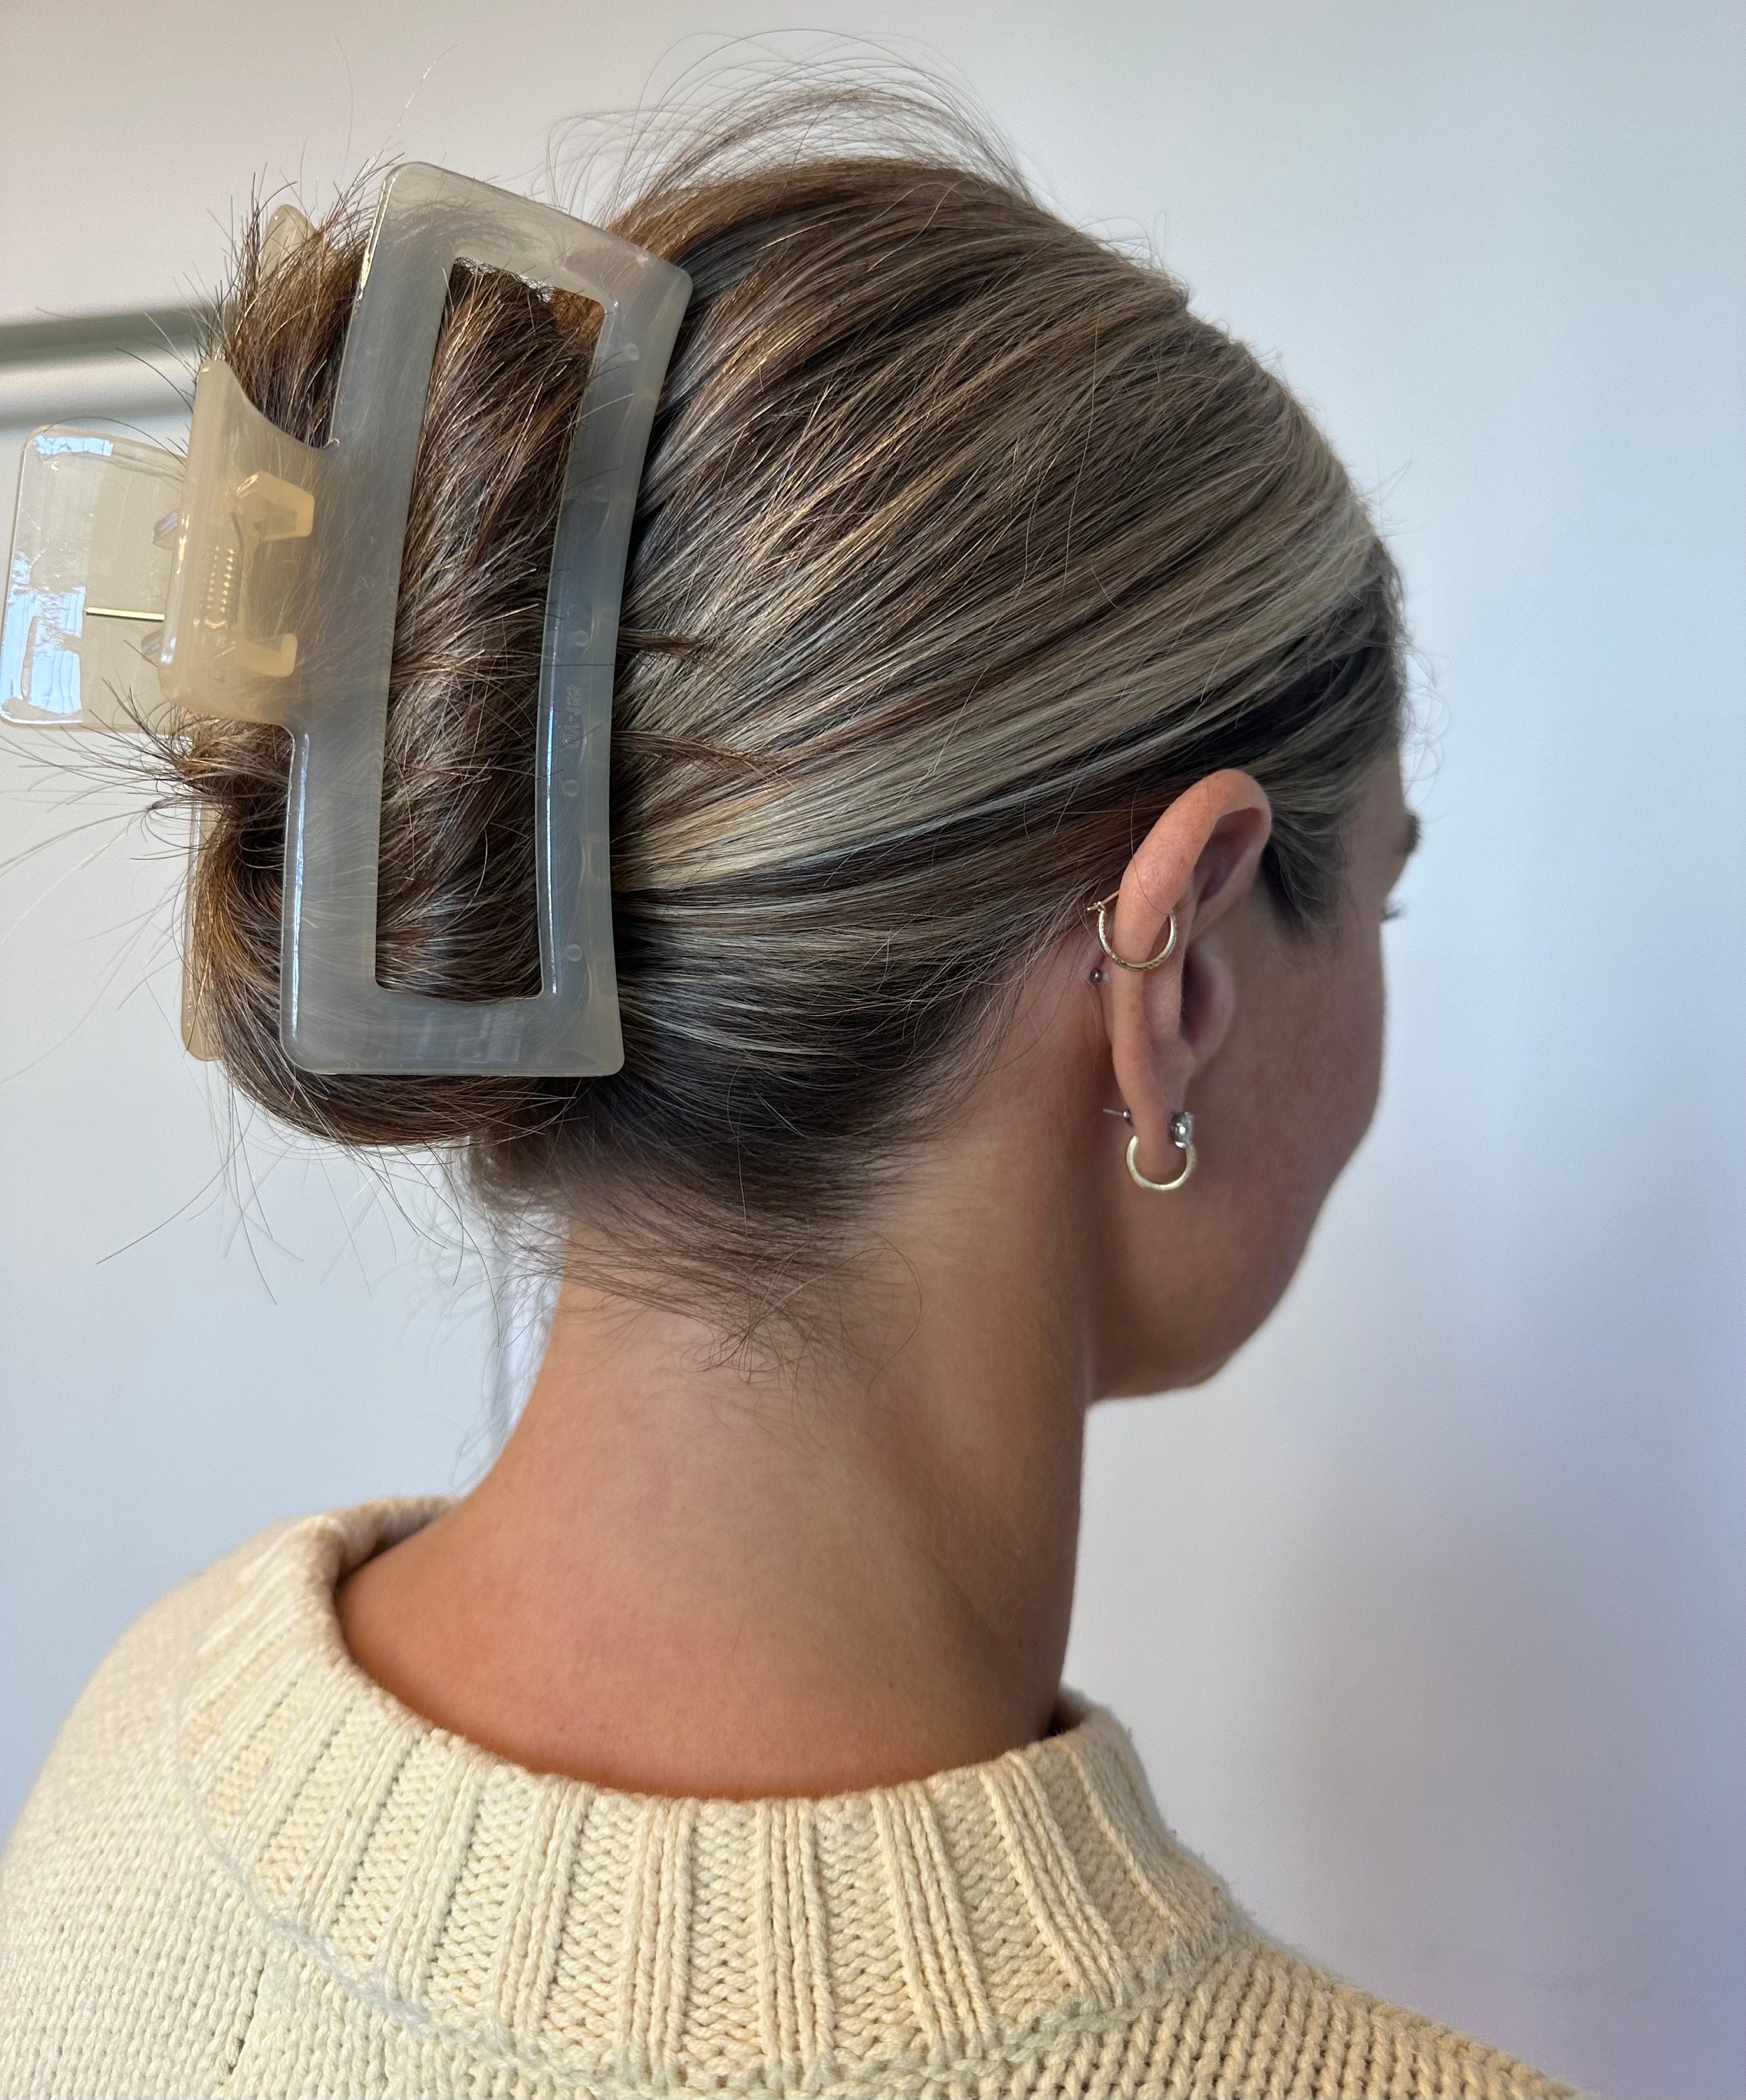 The BANDNAB Hair Tie, Scrunchie, and Banded Accessories Organizer Makes A Great Unique Gift for Anyone with Long Hair.